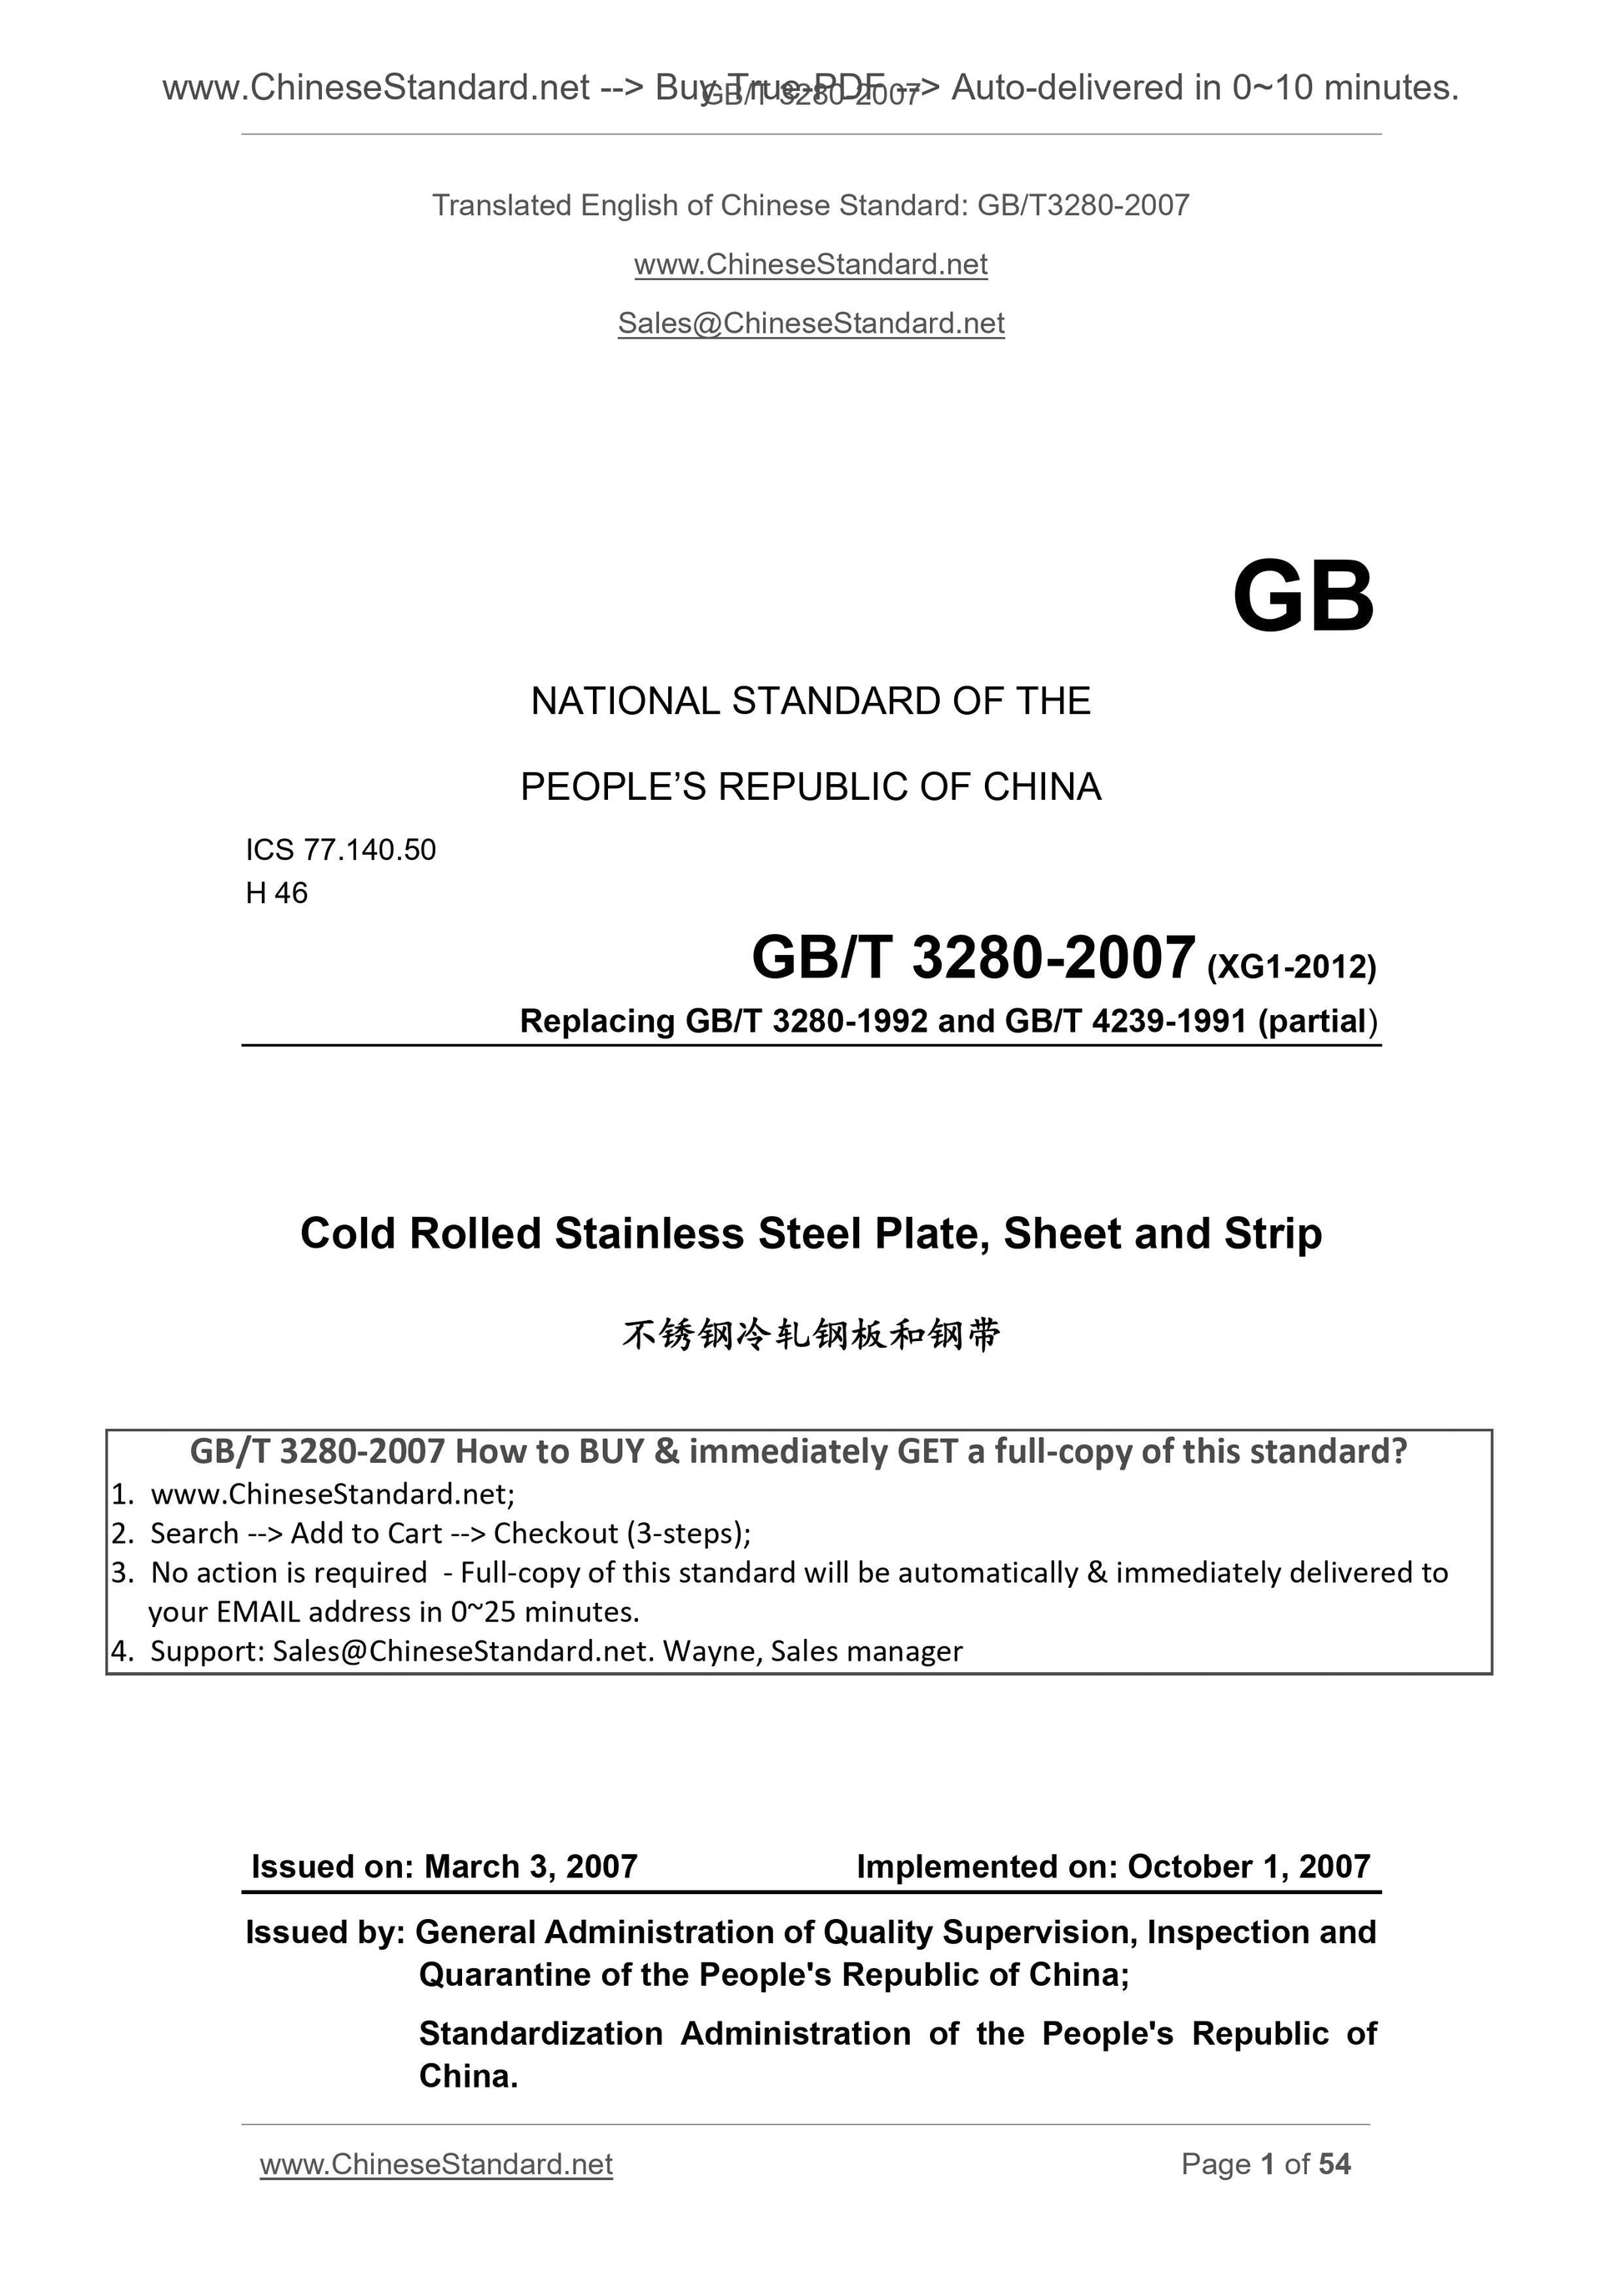 GB/T 3280-2007 Page 1